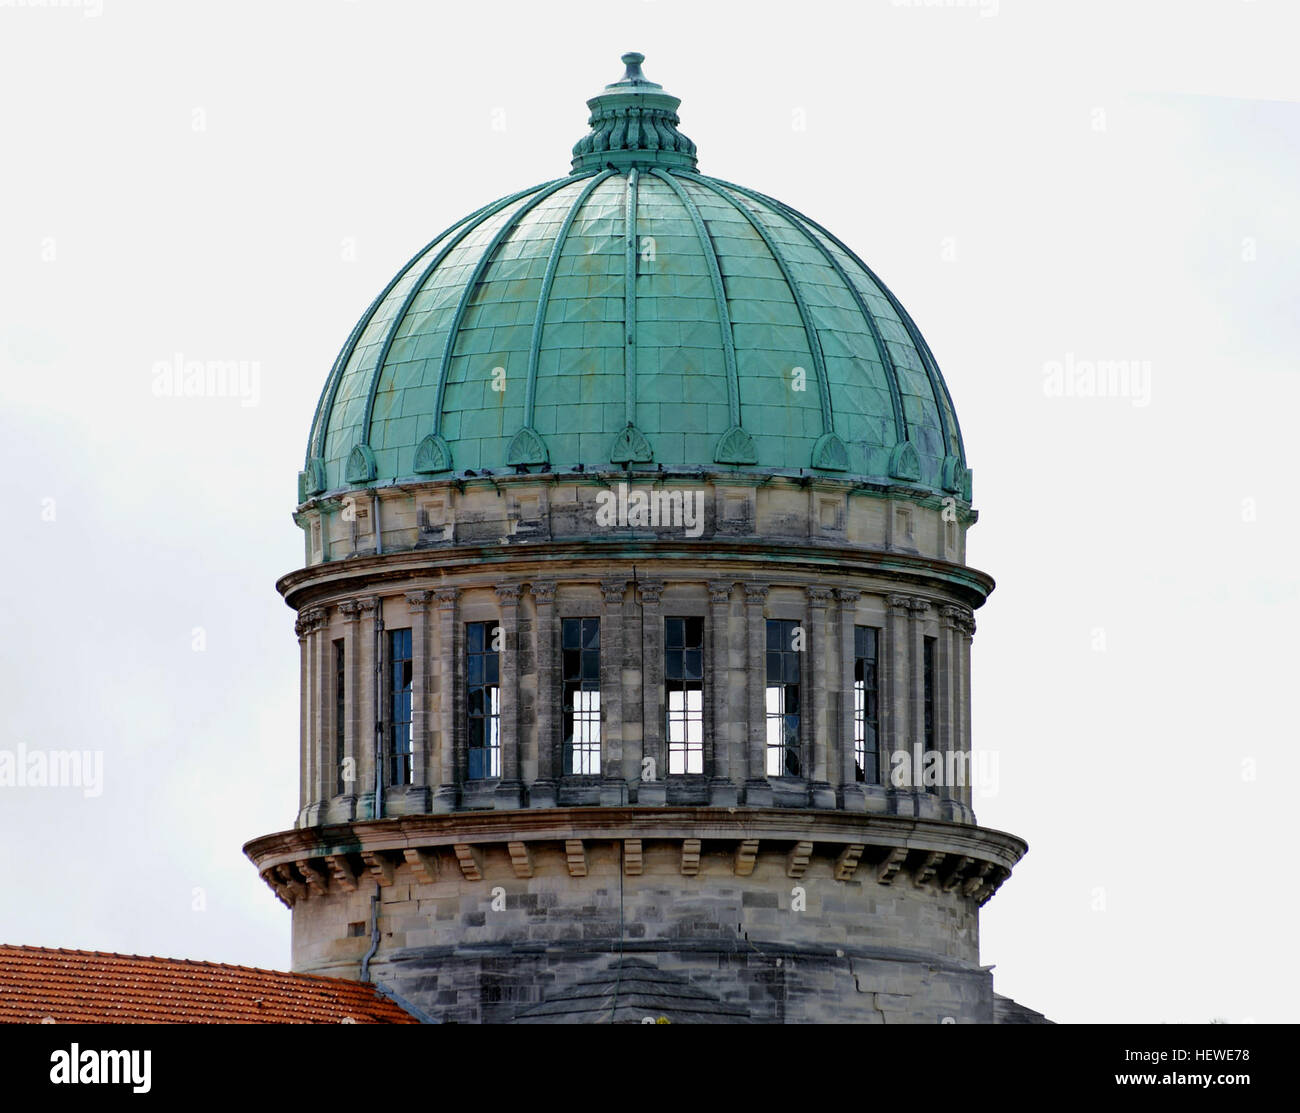 ication (,),Catholic Cathedral,Christchurch Earthquake,Damage,Damaged buildings,Damaged dome,Neo-Classic,Oamaru Limestone,cathedral,church architecture,dome Stock Photo